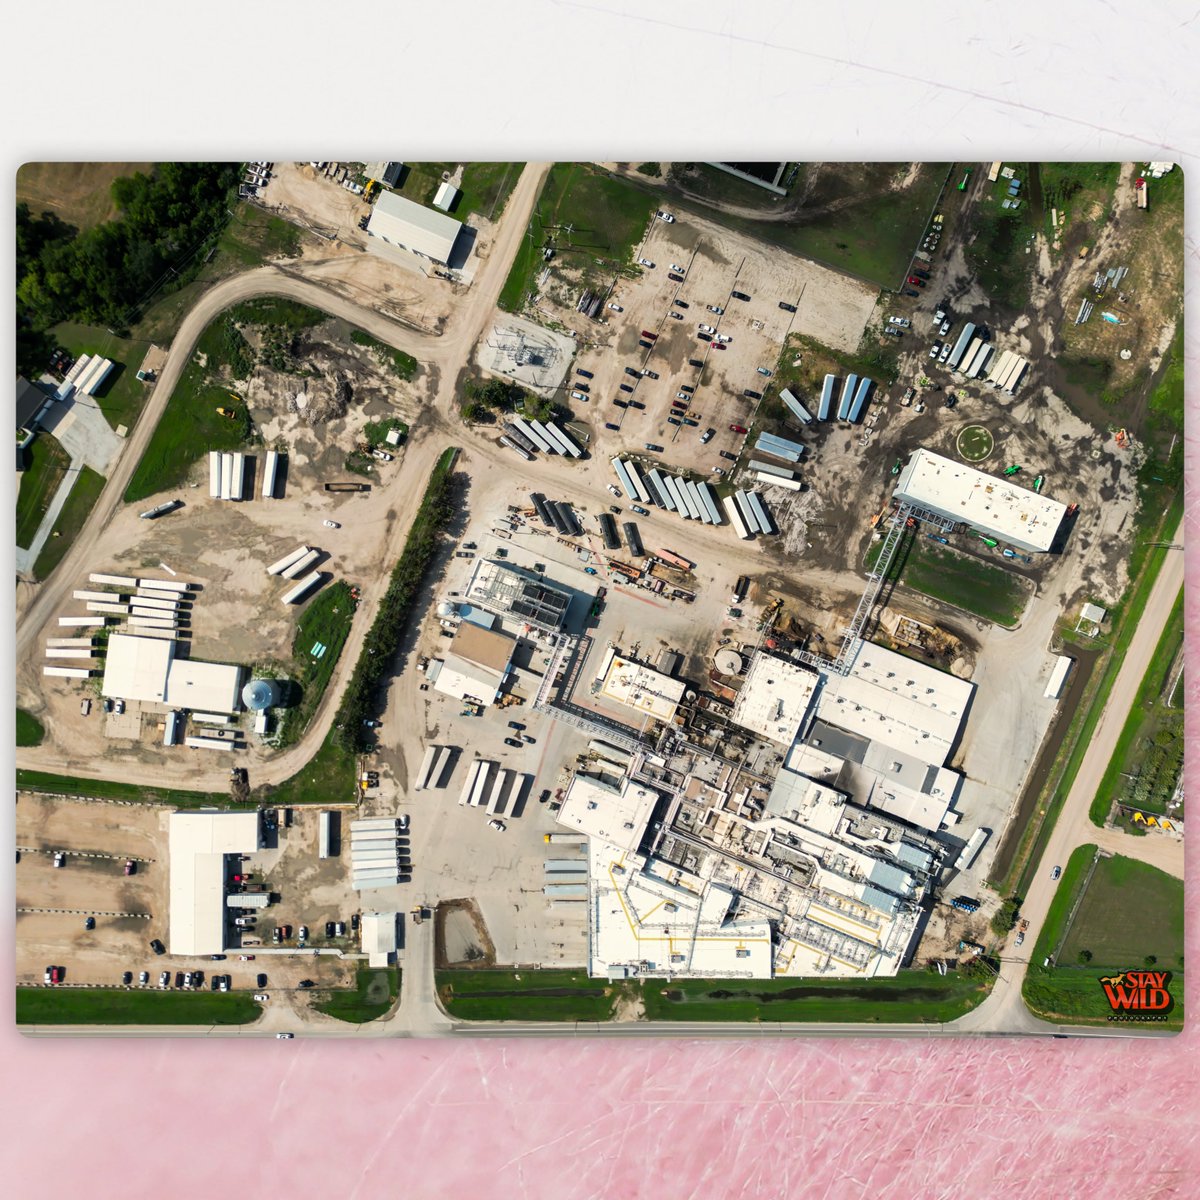 Check out how the Gibbon Packing LLC/American Food Group looks from up above. 🥩🍔🌮 

#GibbonPackingLLC #AmericanFoodGroup #DeliciousEats #FoodPacking #FoodPackaging #TastyTreats #YummyFood #FoodLovers #FoodieLife #FoodieCommunity #FoodLove #FoodGloriousFood #FoodAdventures